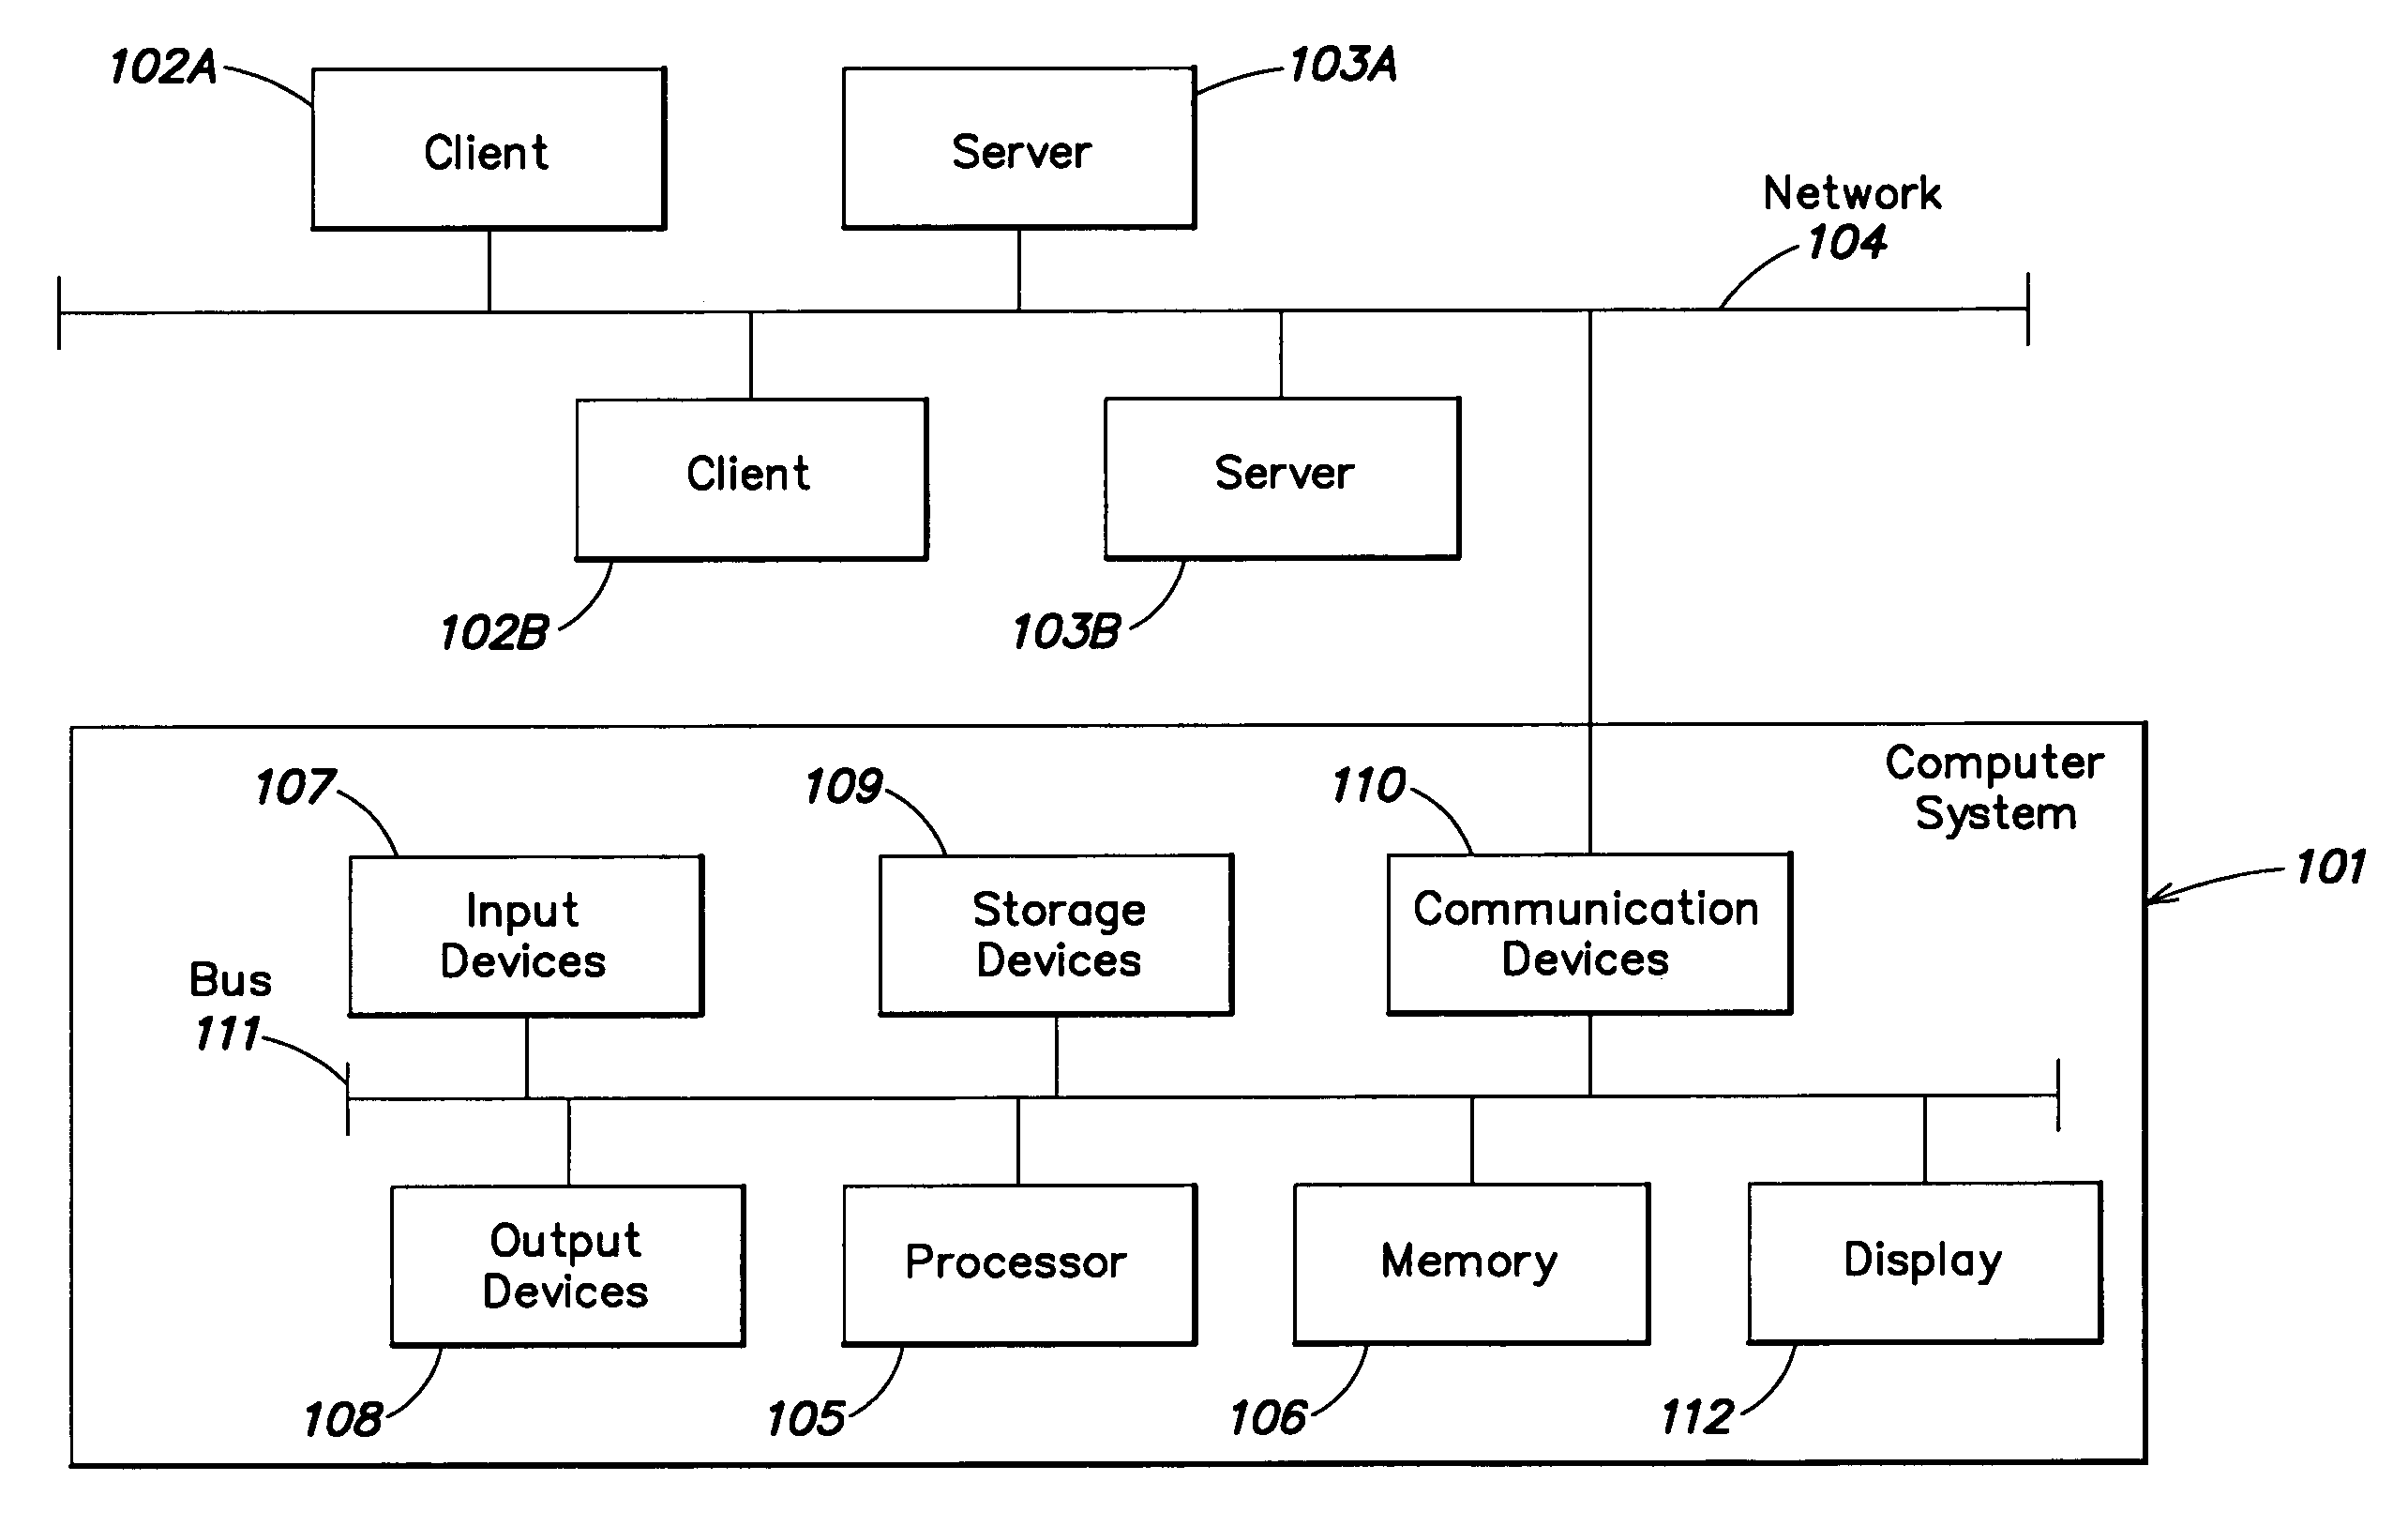 Method and system for synchronizing and serving multimedia in a distributed network